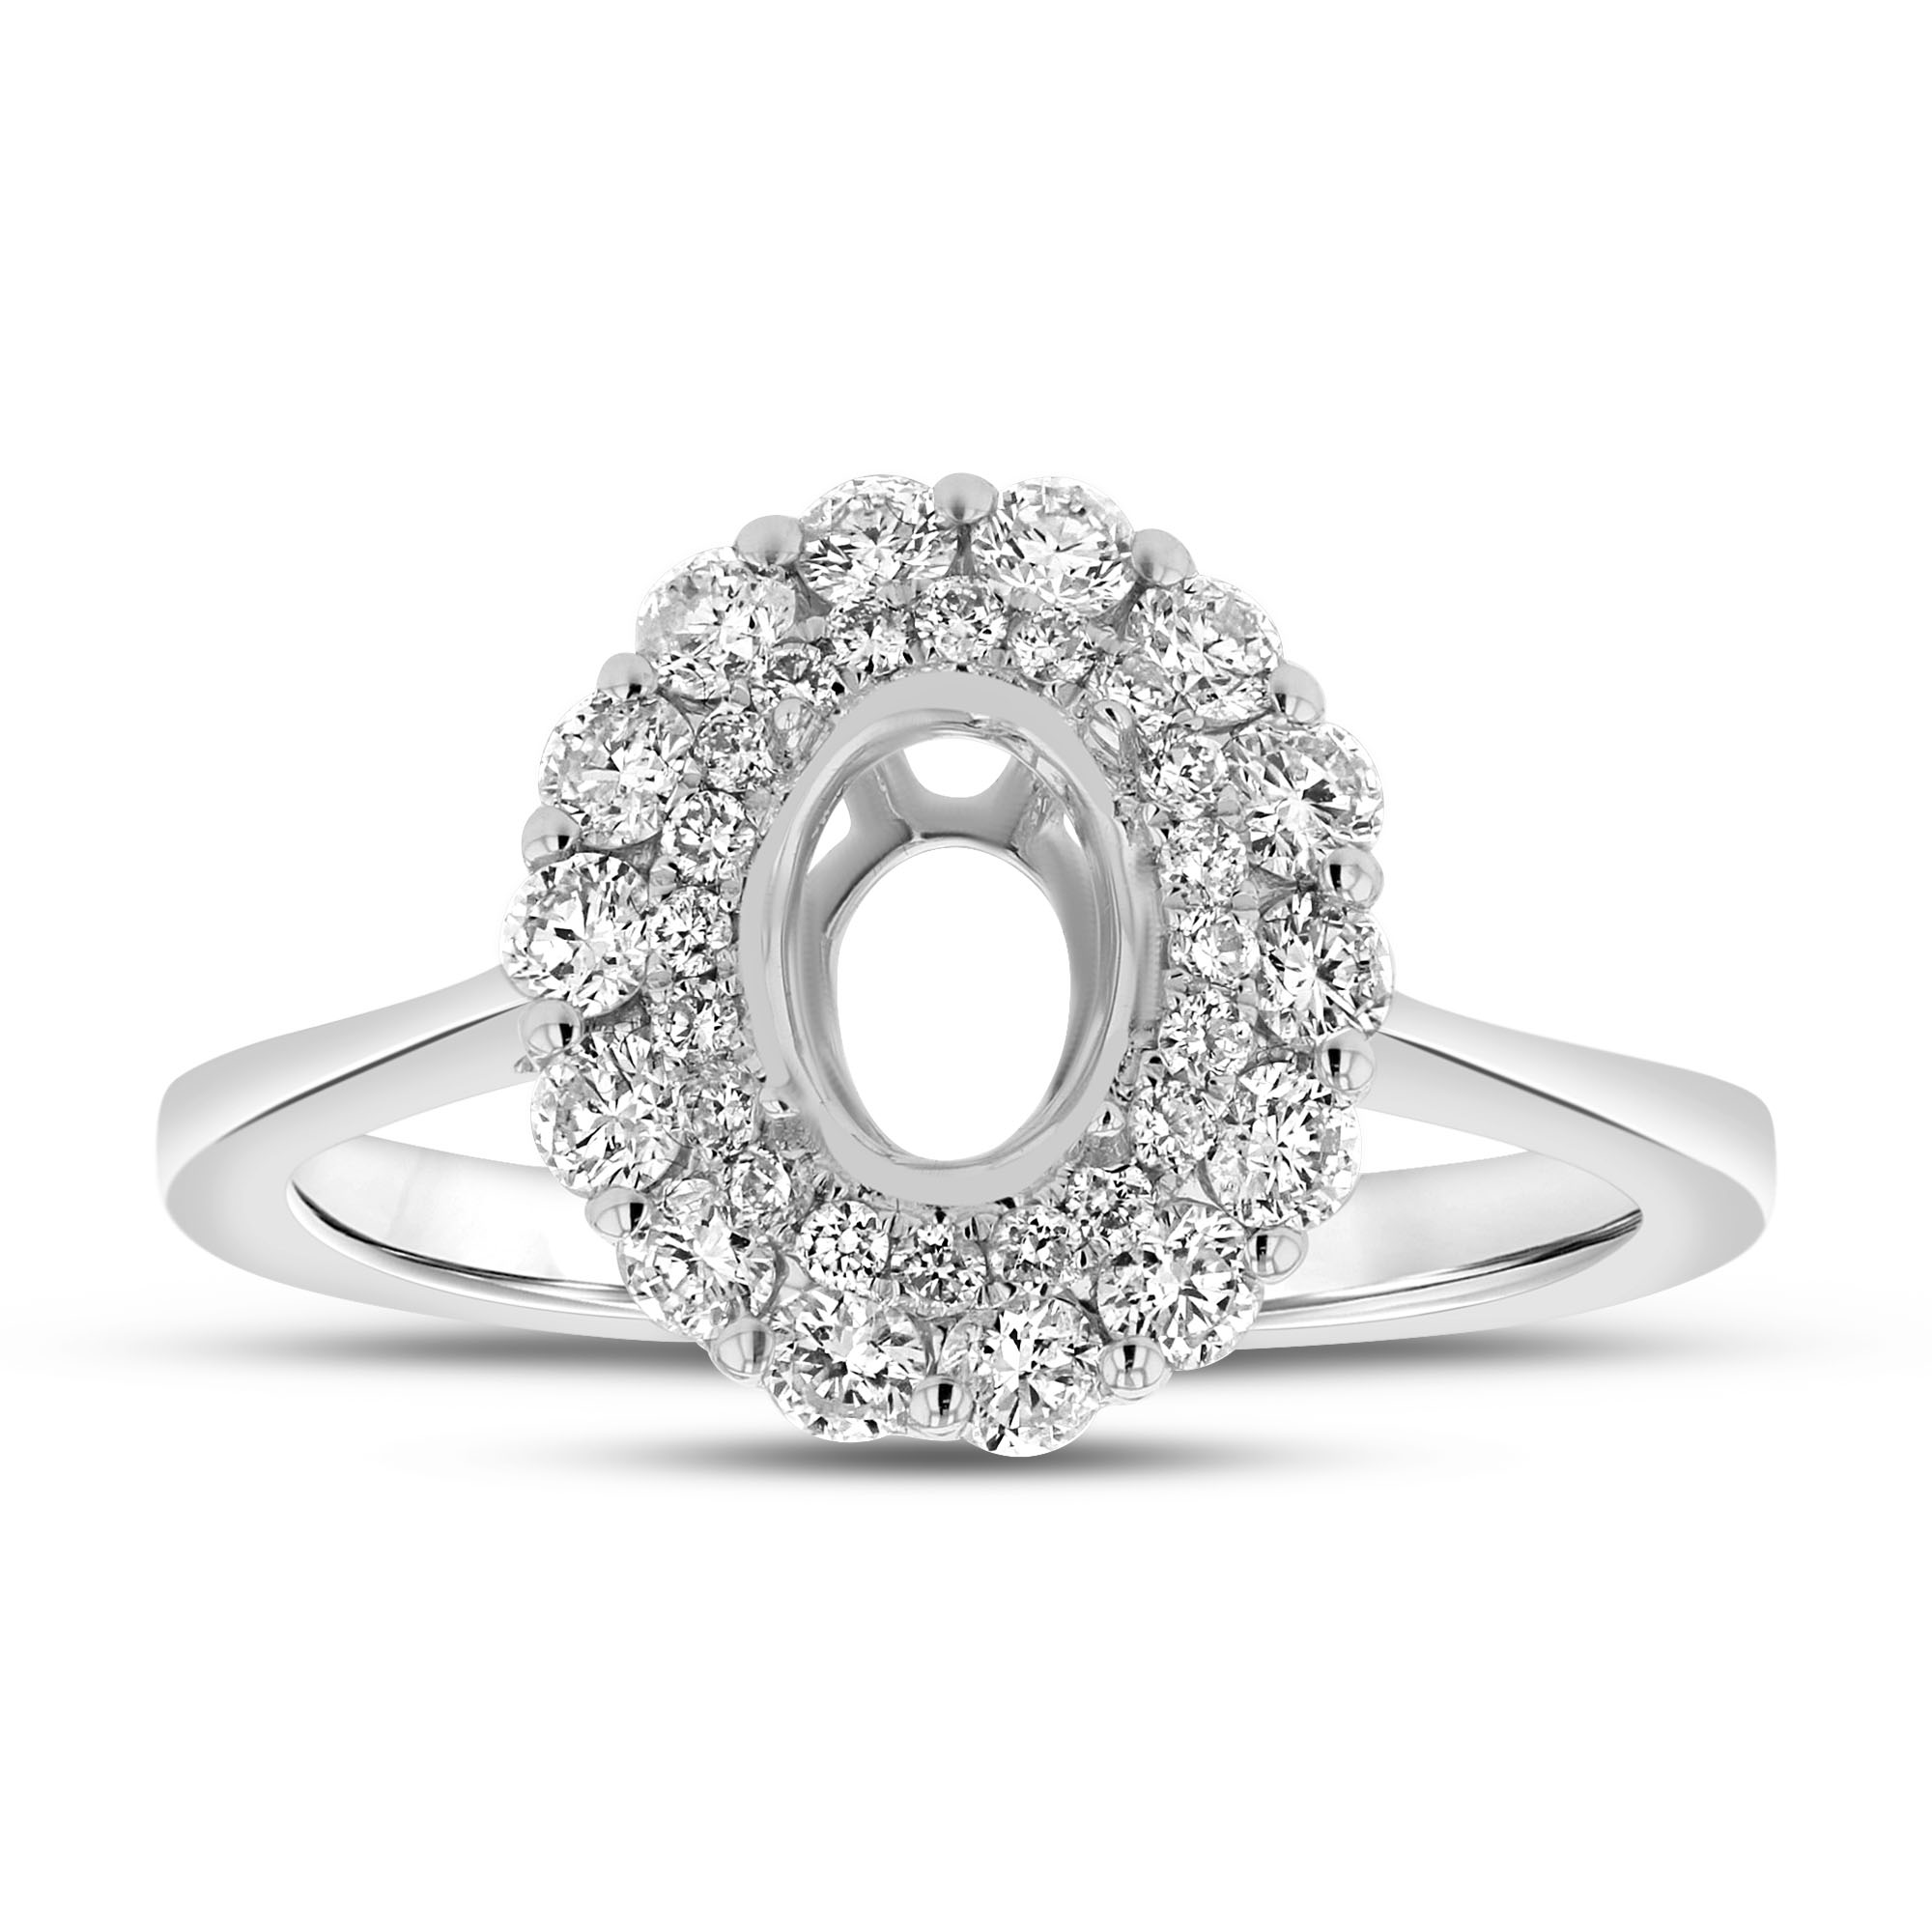 View 0.60ctw Diamond Oval Semi Mount Engagement Ring in 14k White Gold